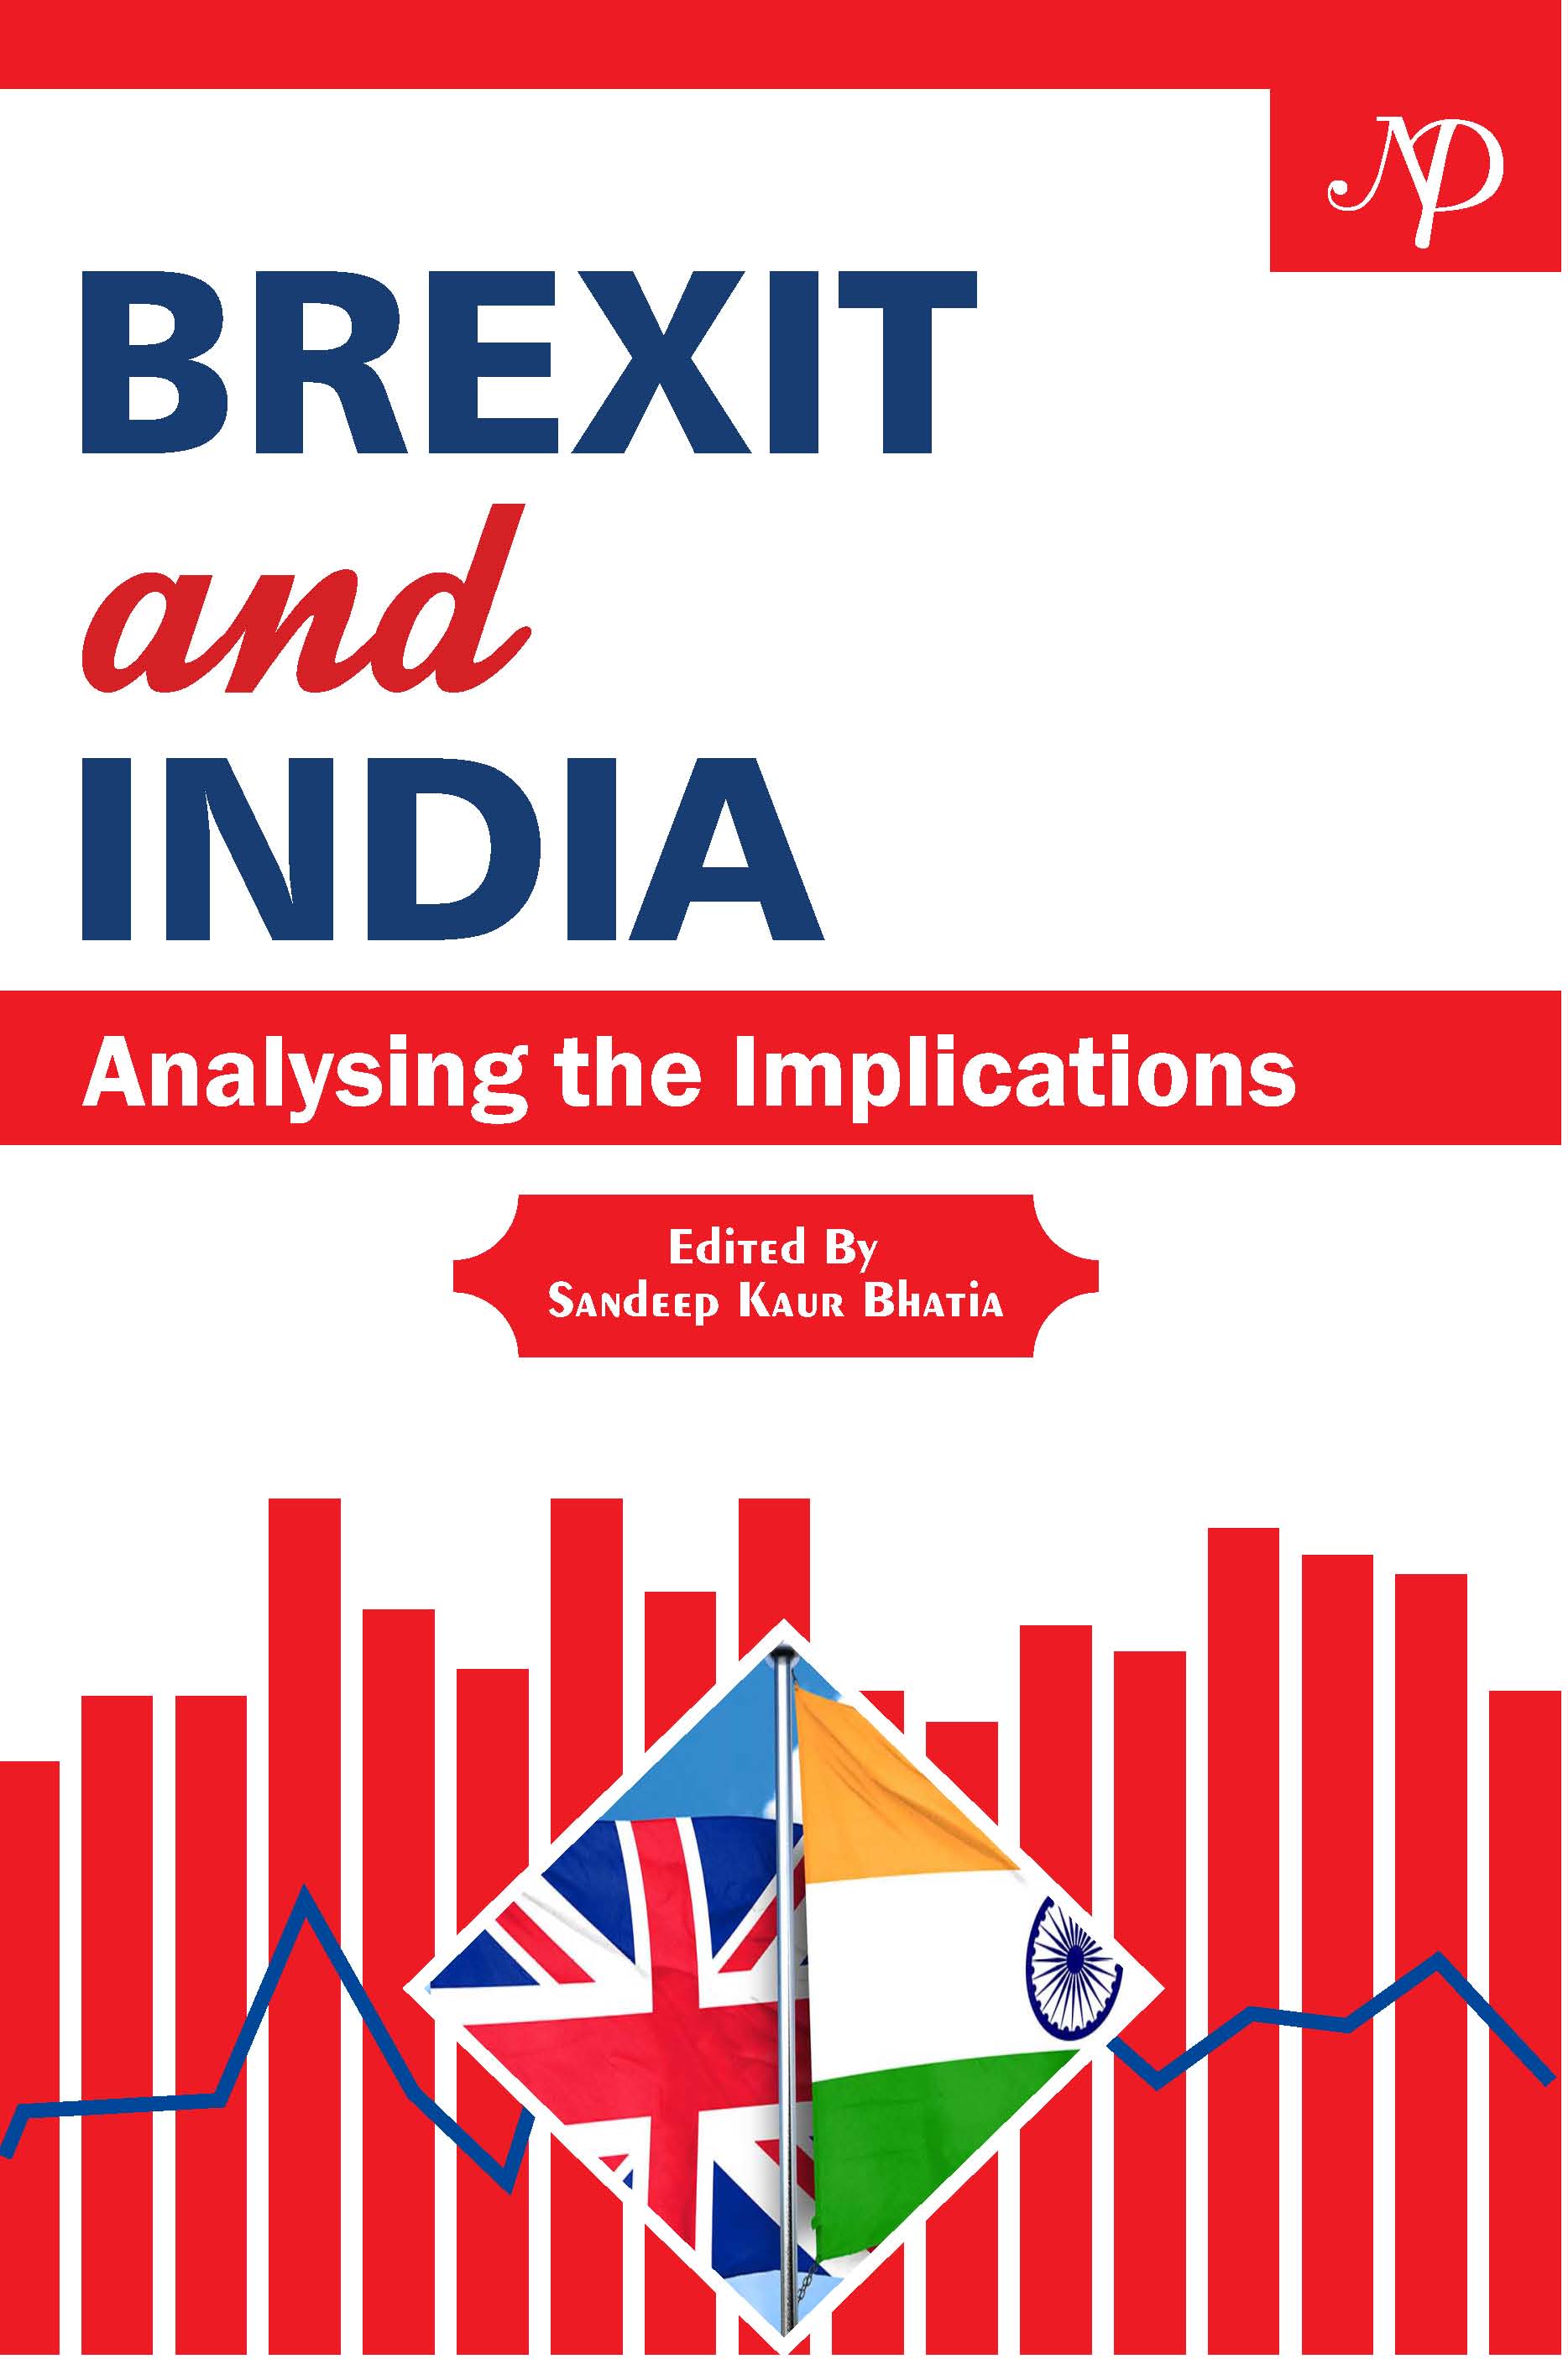 Brexit and India analysing the implications - Copy.jpg